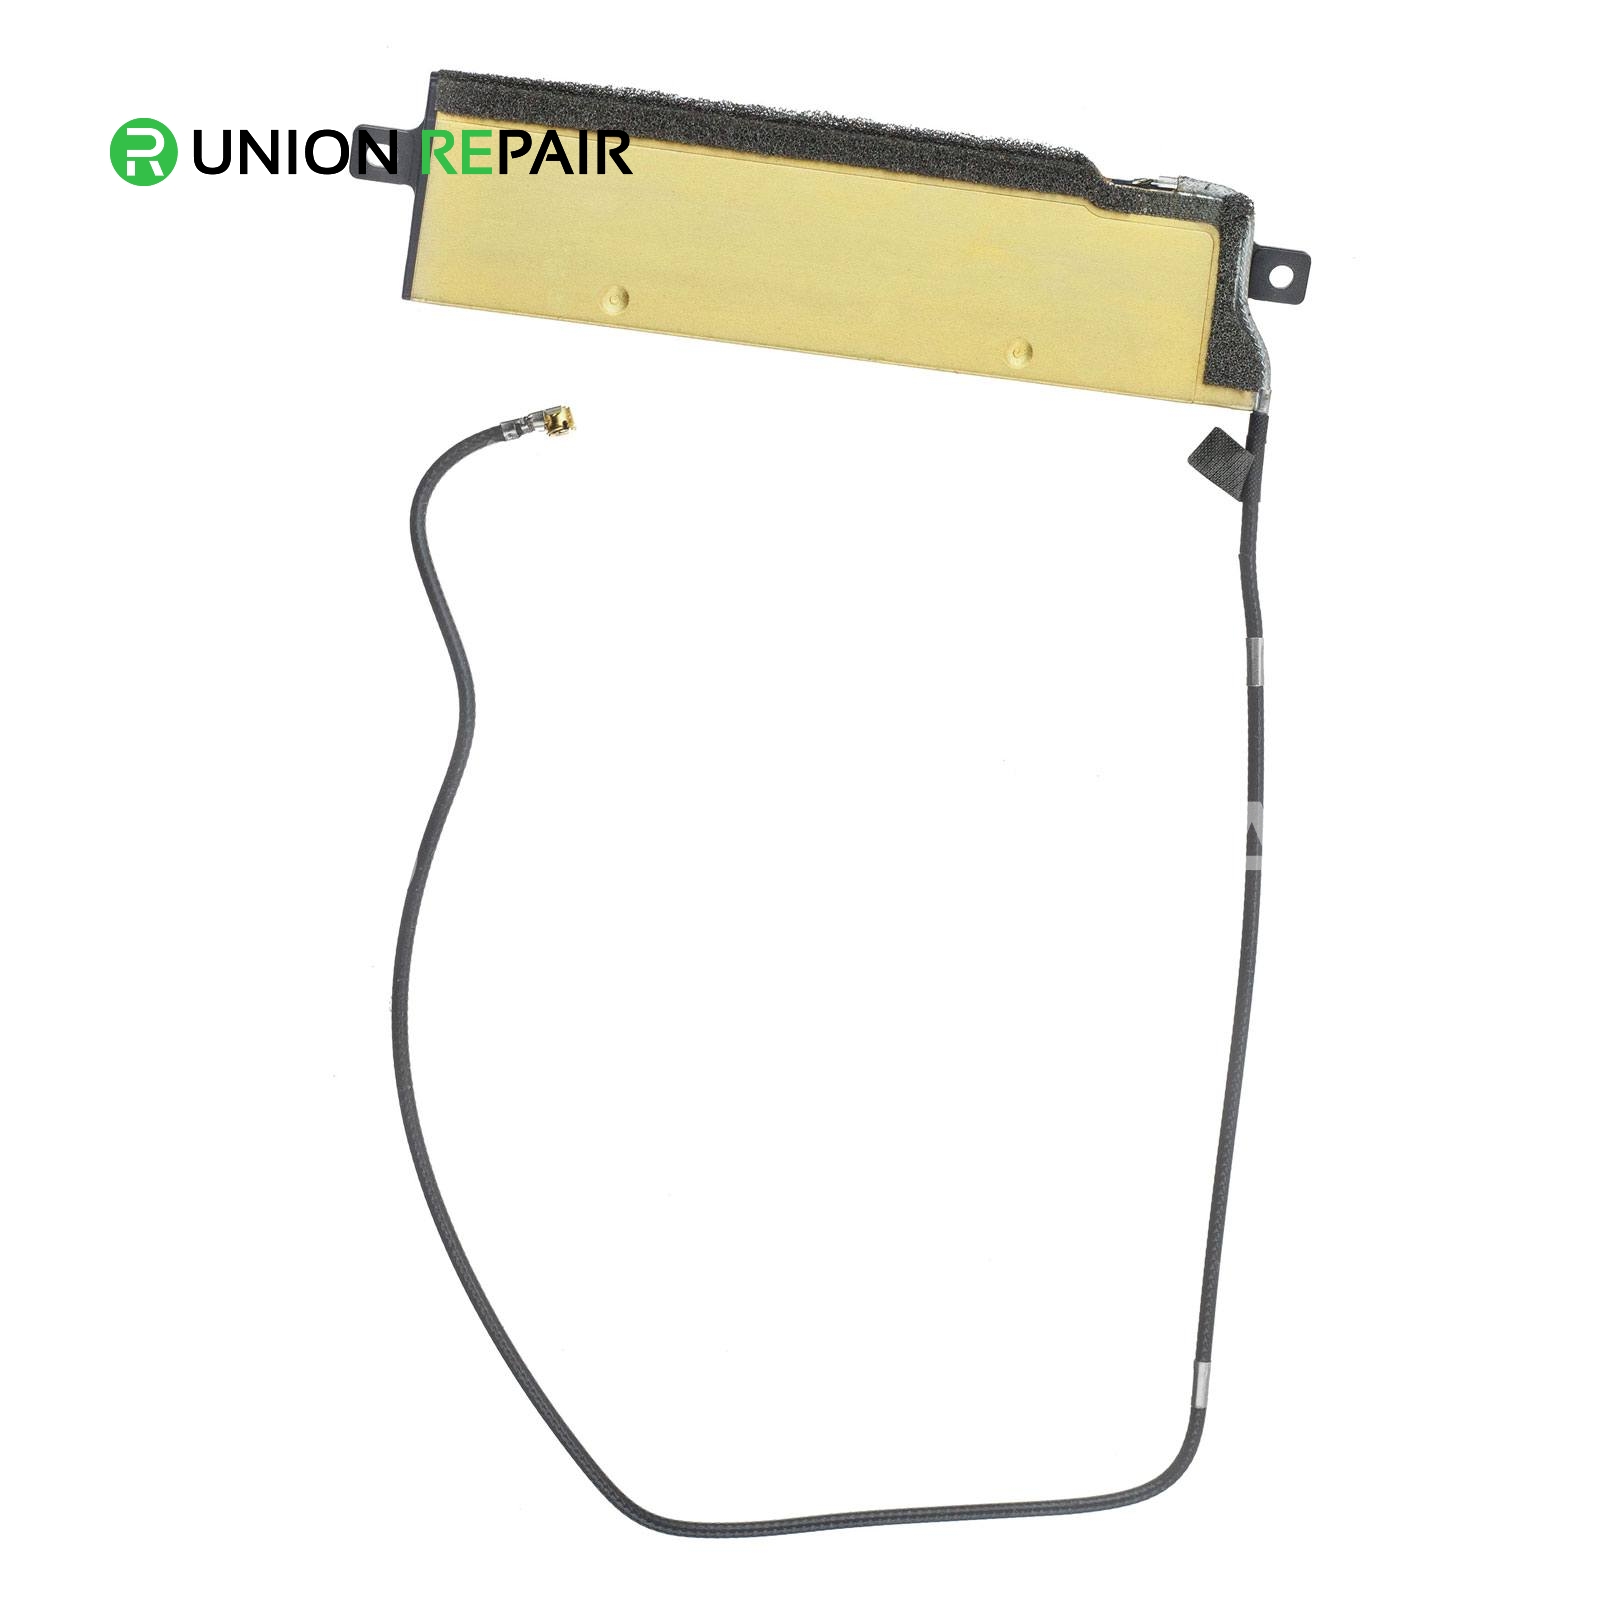 Mid/Lower WiFi Antenna for iMac 27" A1419 (Late 2012, Mid 2015)